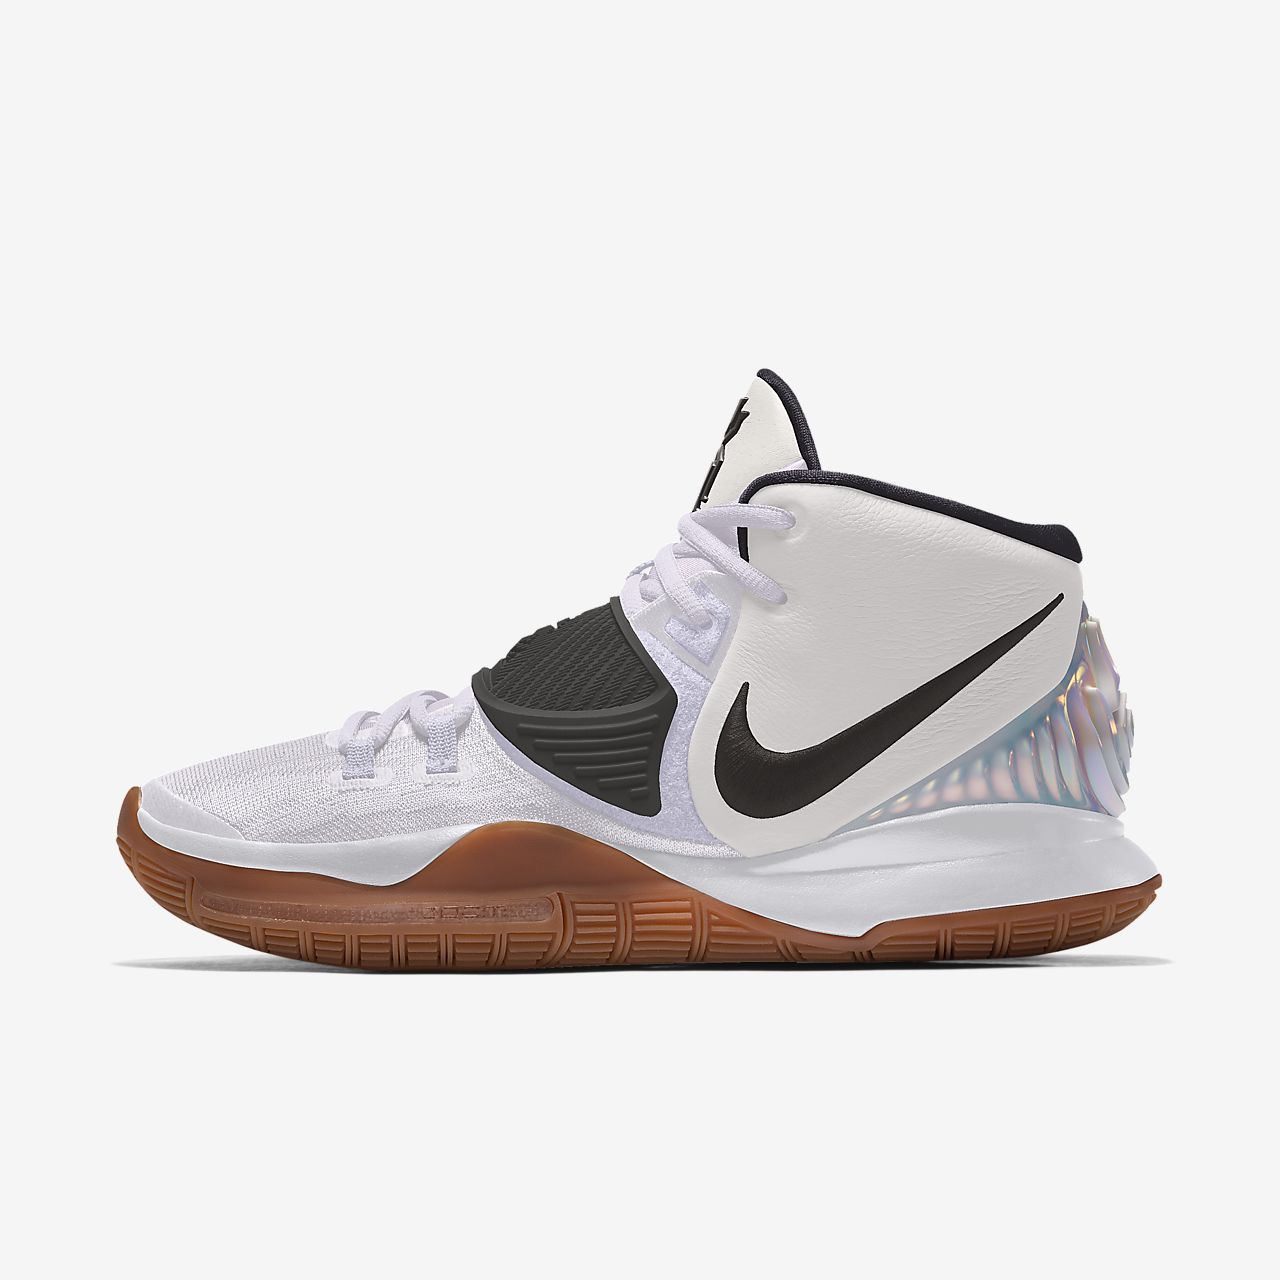 kyrie 6 youth cheap online